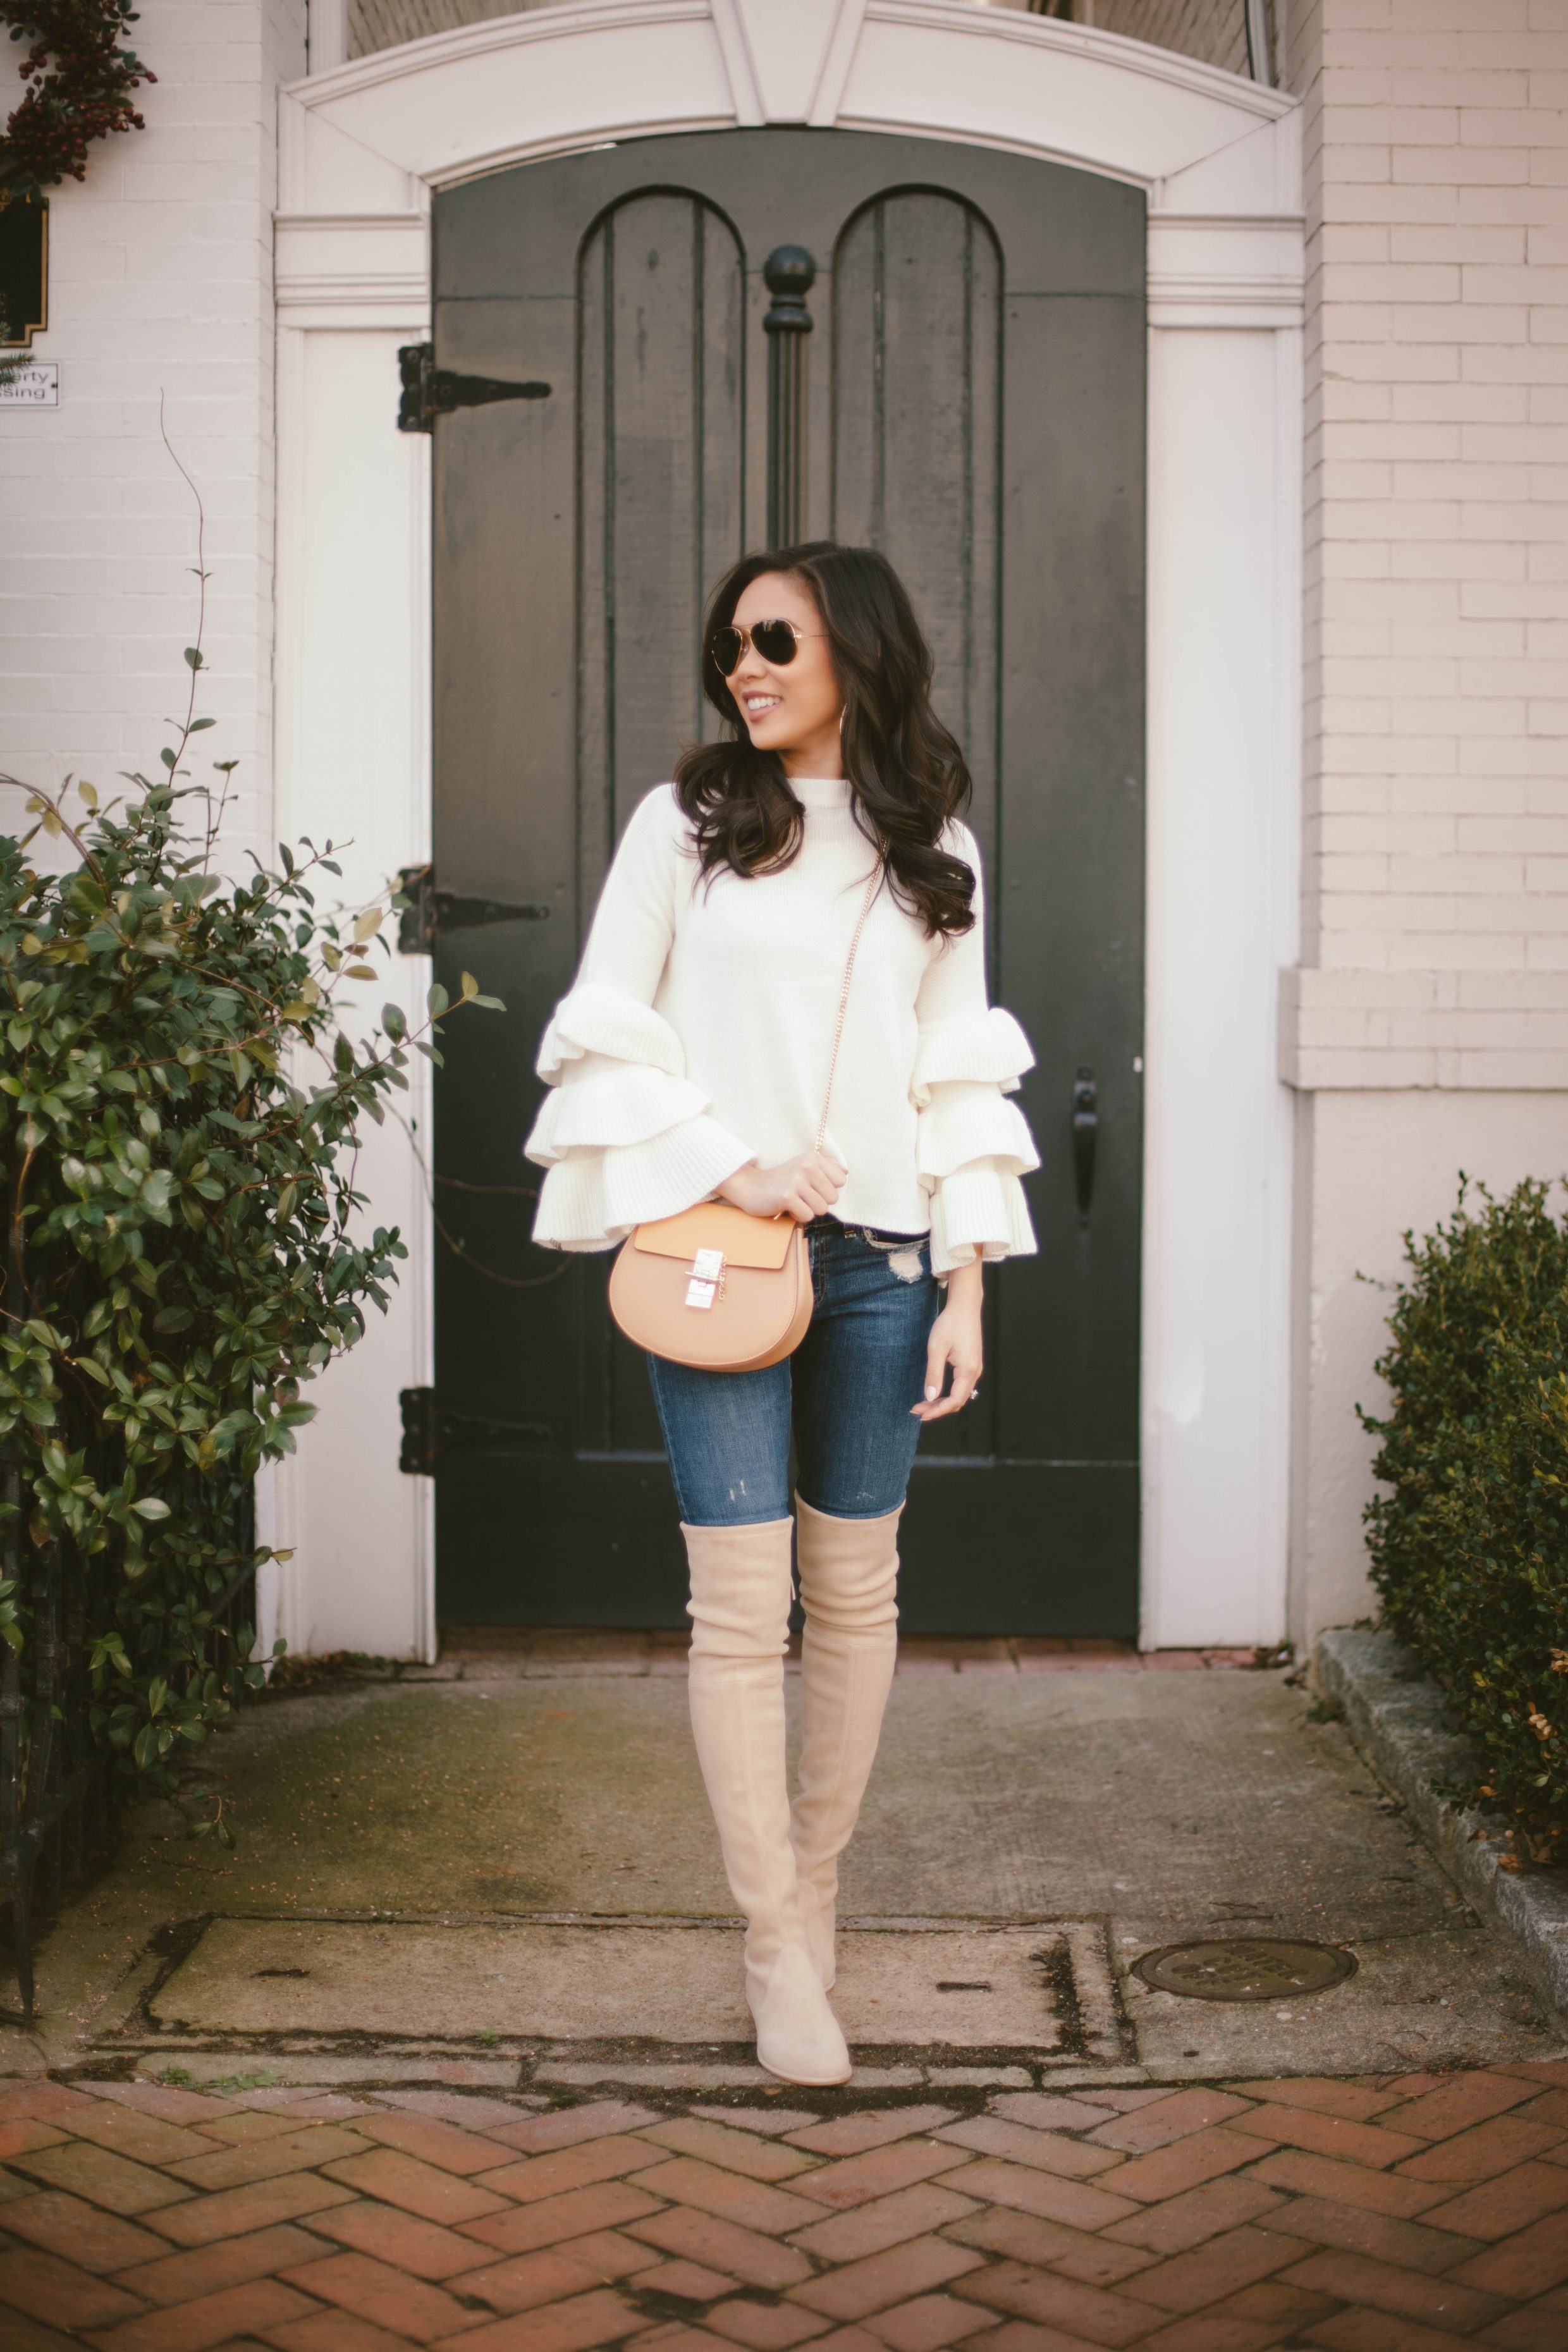 Hoang-Kim wears a ruffle sleeve sweater with over-the-knee boots in buff suede